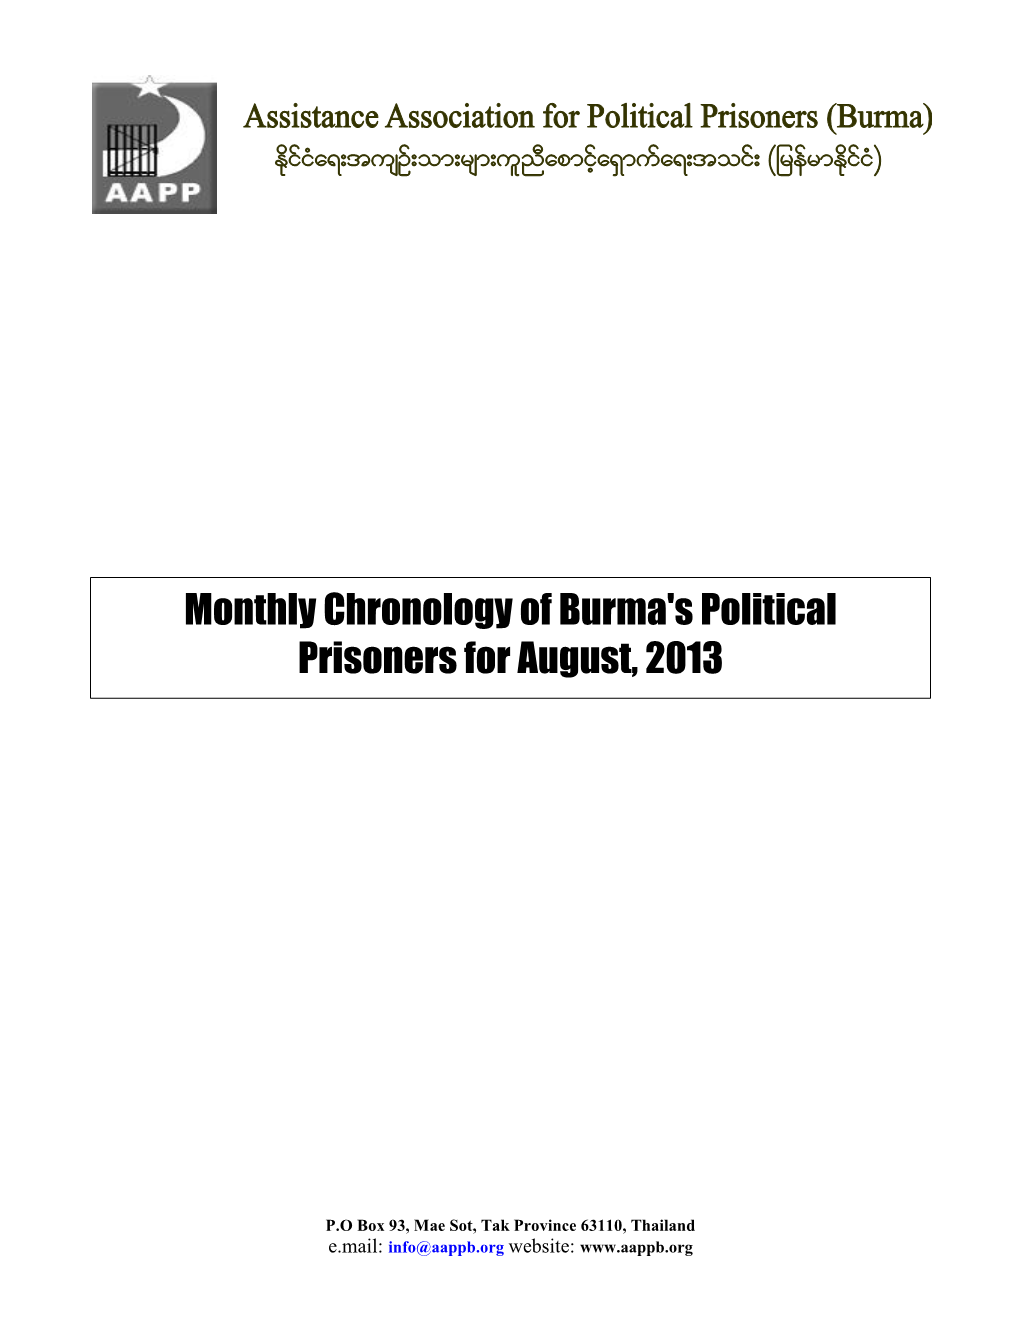 Monthly Chronology of Burma's Political Prisoners for August, 2013